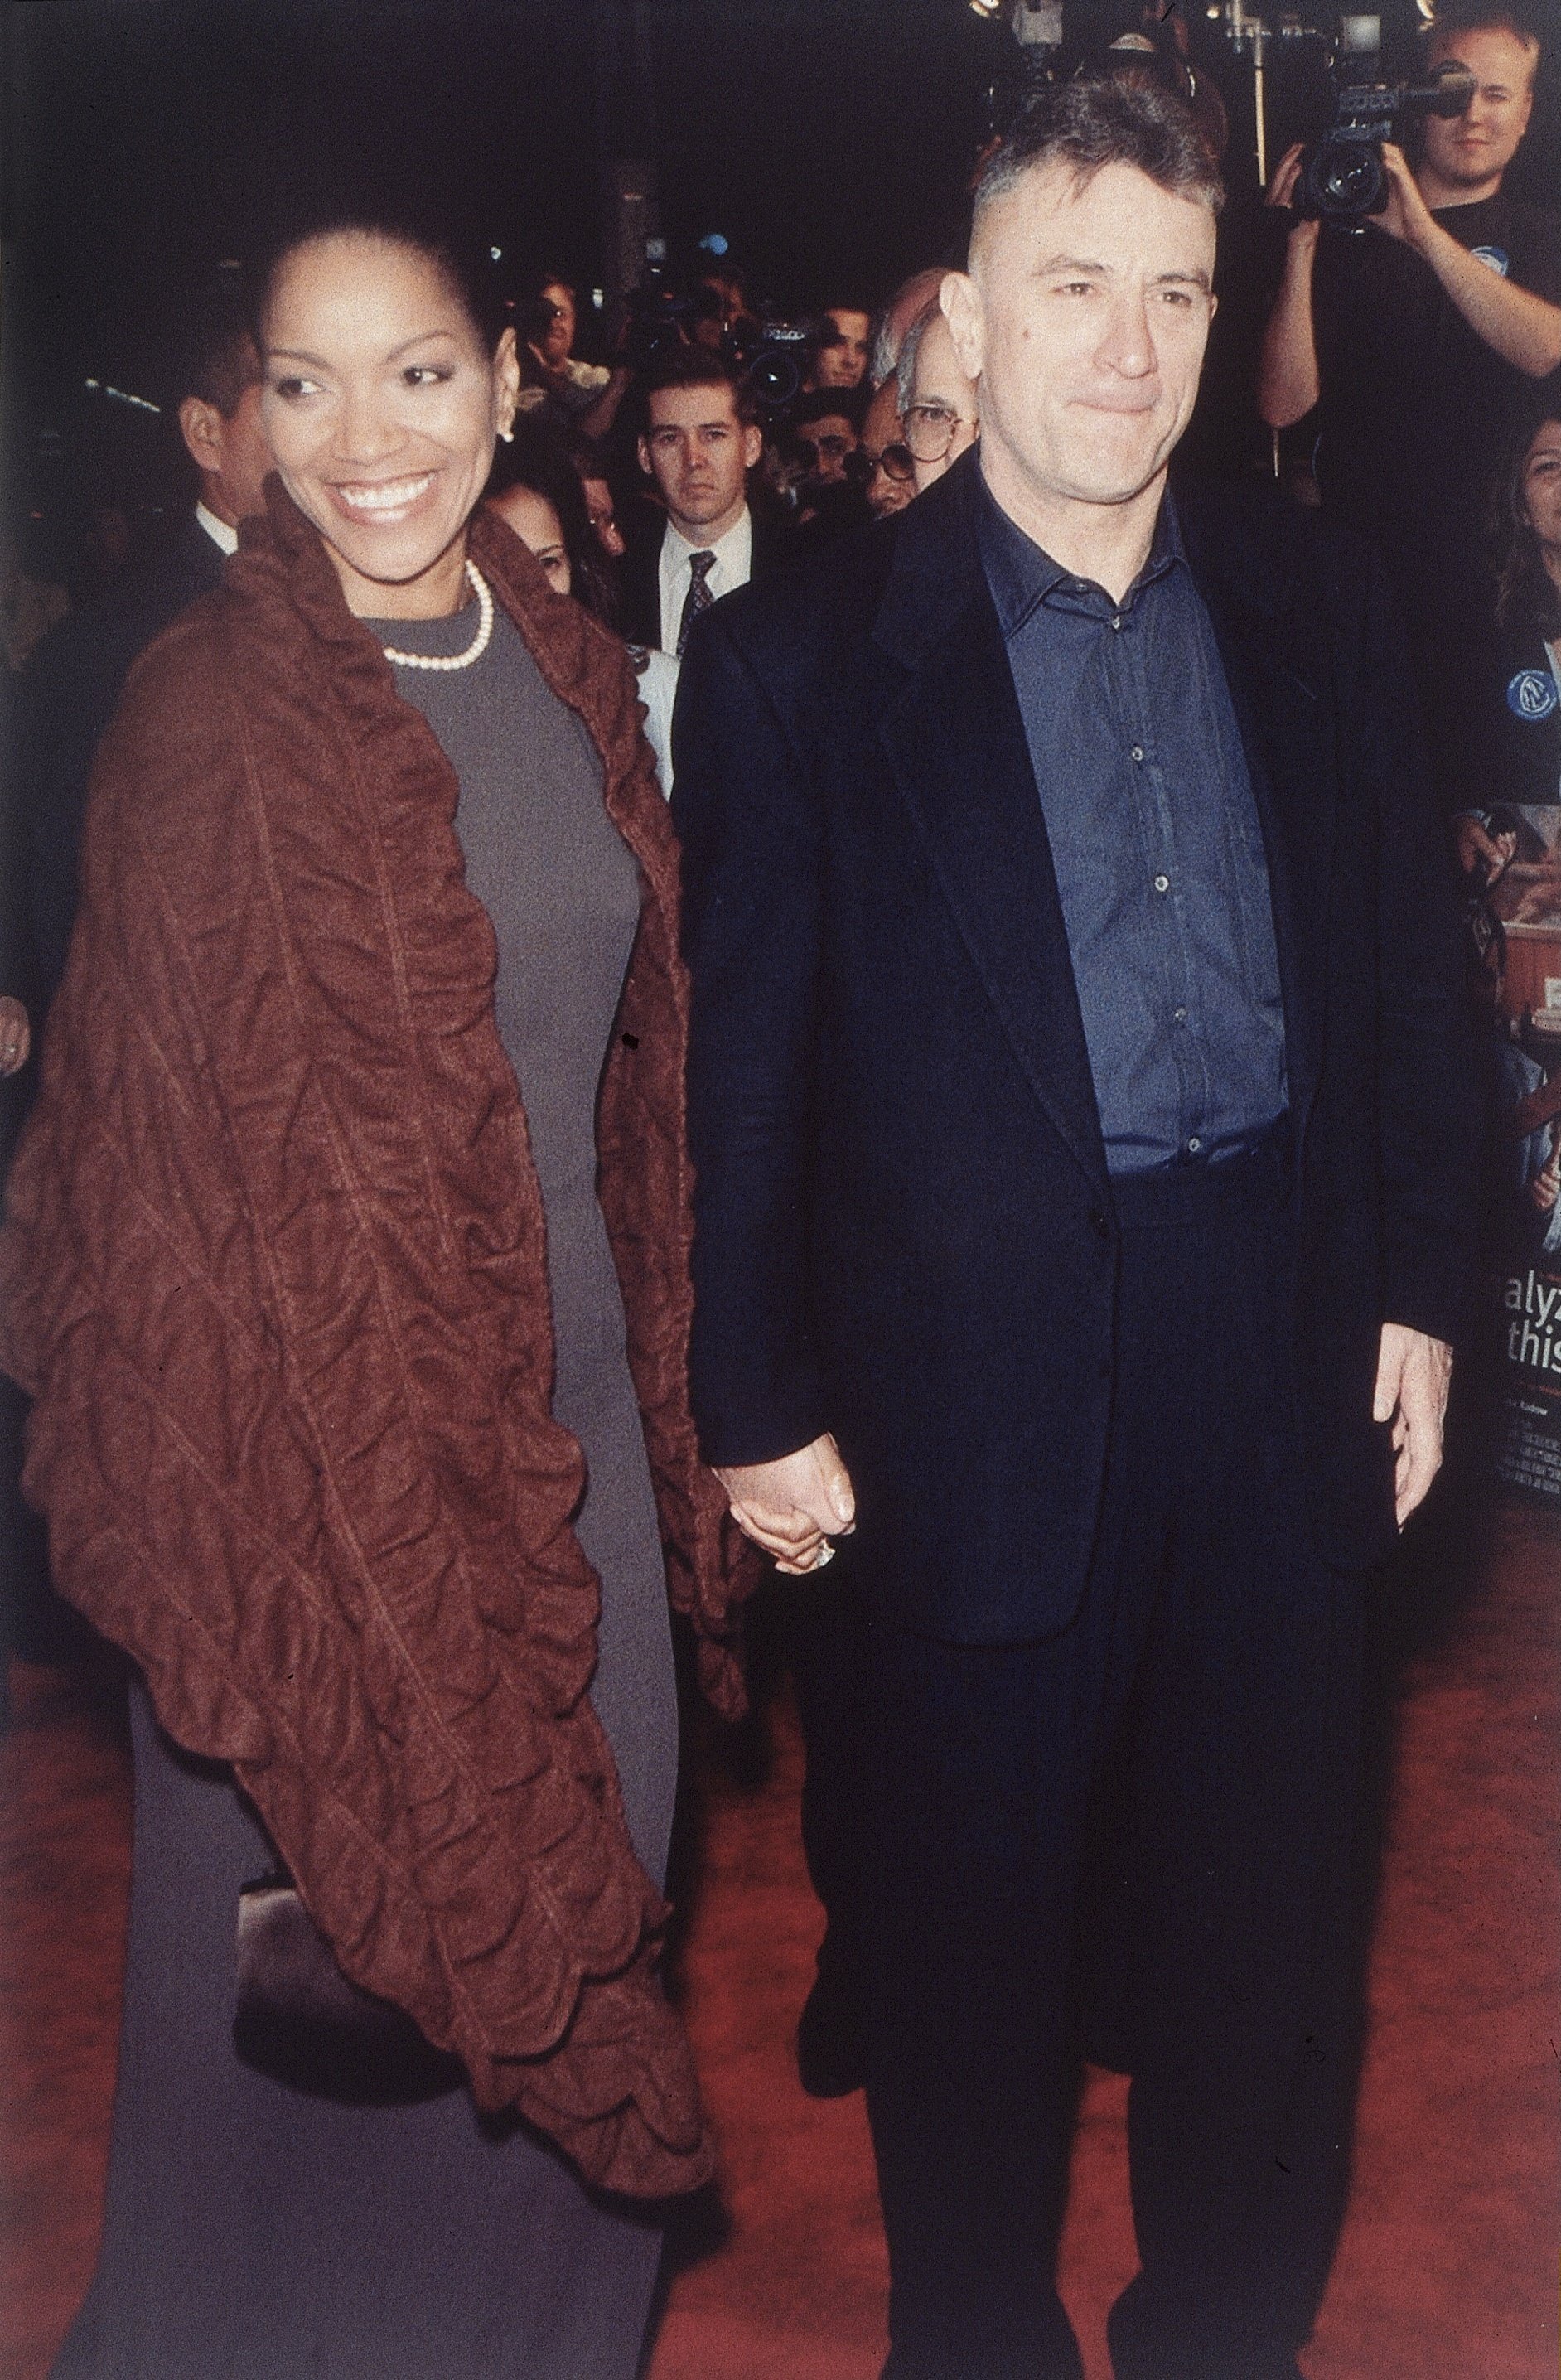 Actor Robert de Niro and his wife actress Grace Hightower photographed in 1999 | Source: Getty Images